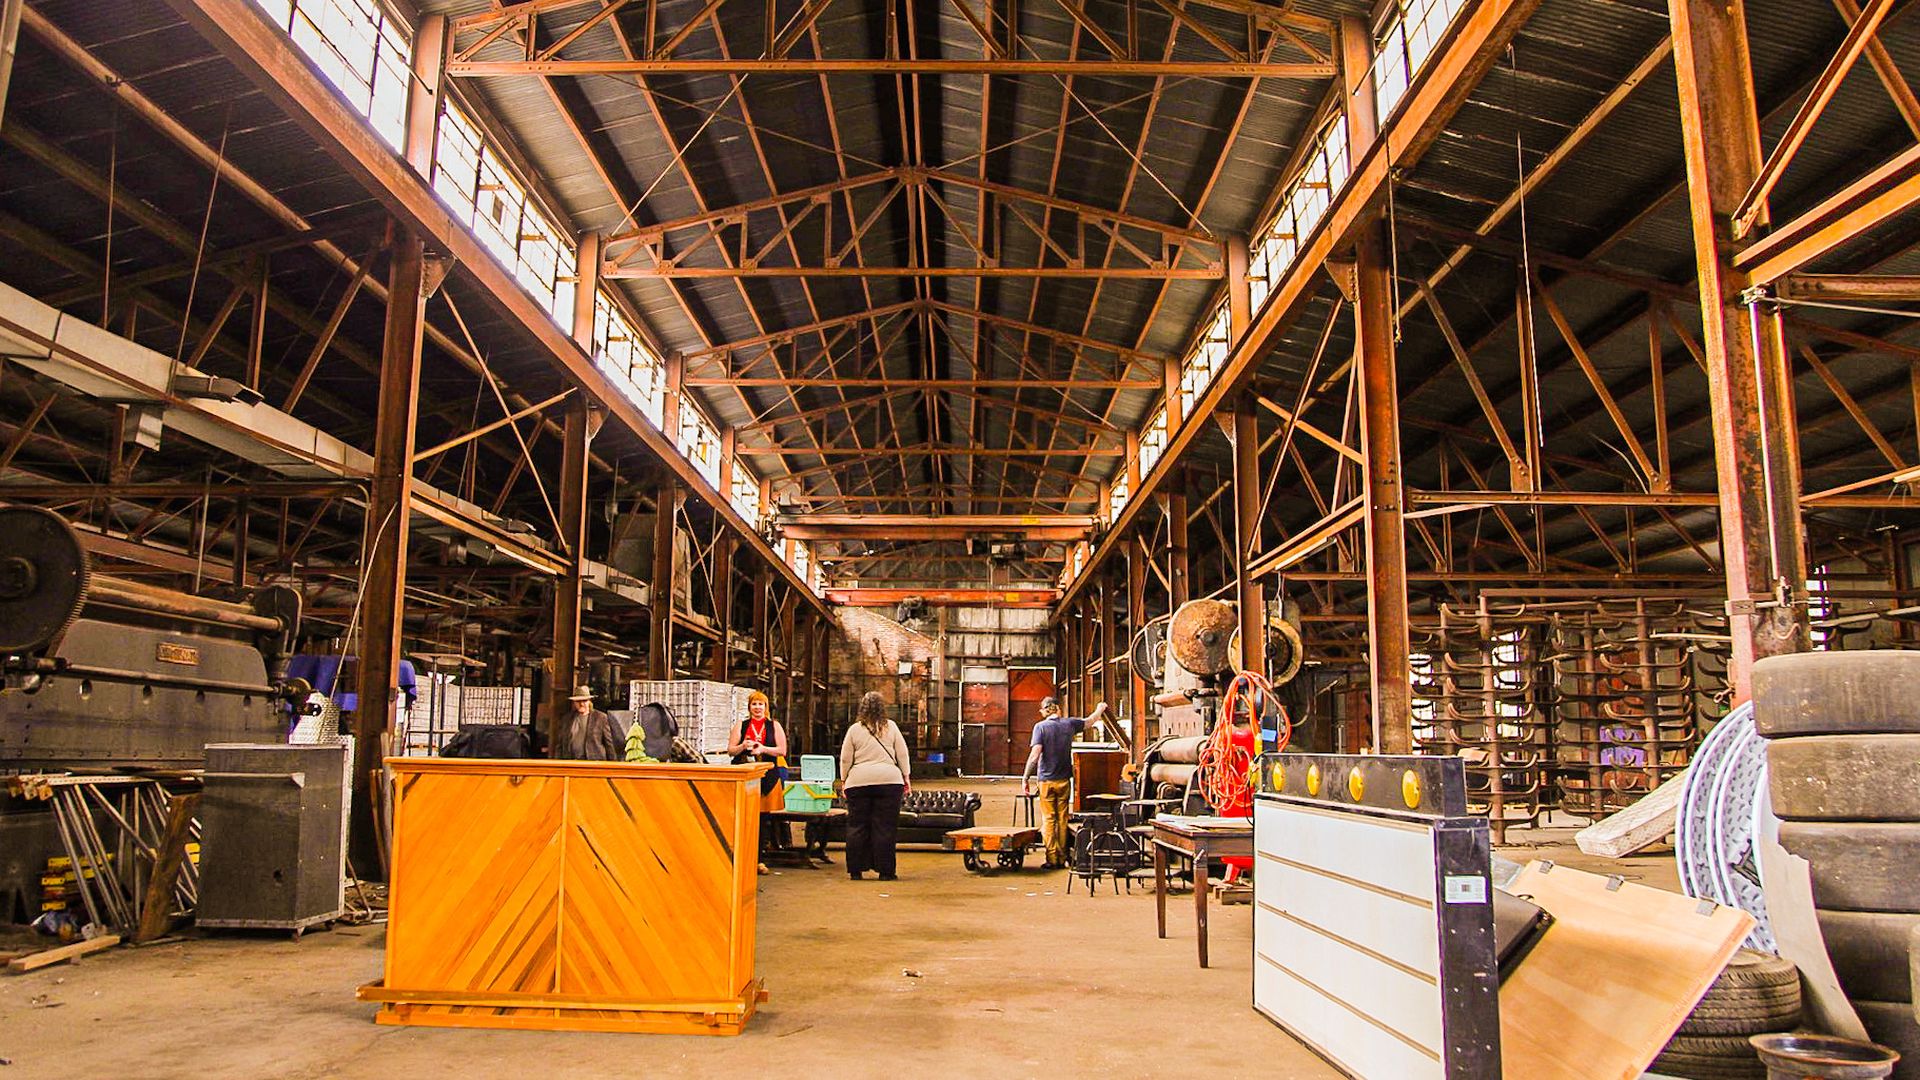 An empty manufacturing facility with clerestory windows and people celebrating the building's upcoming conversion into a kombucha brewery